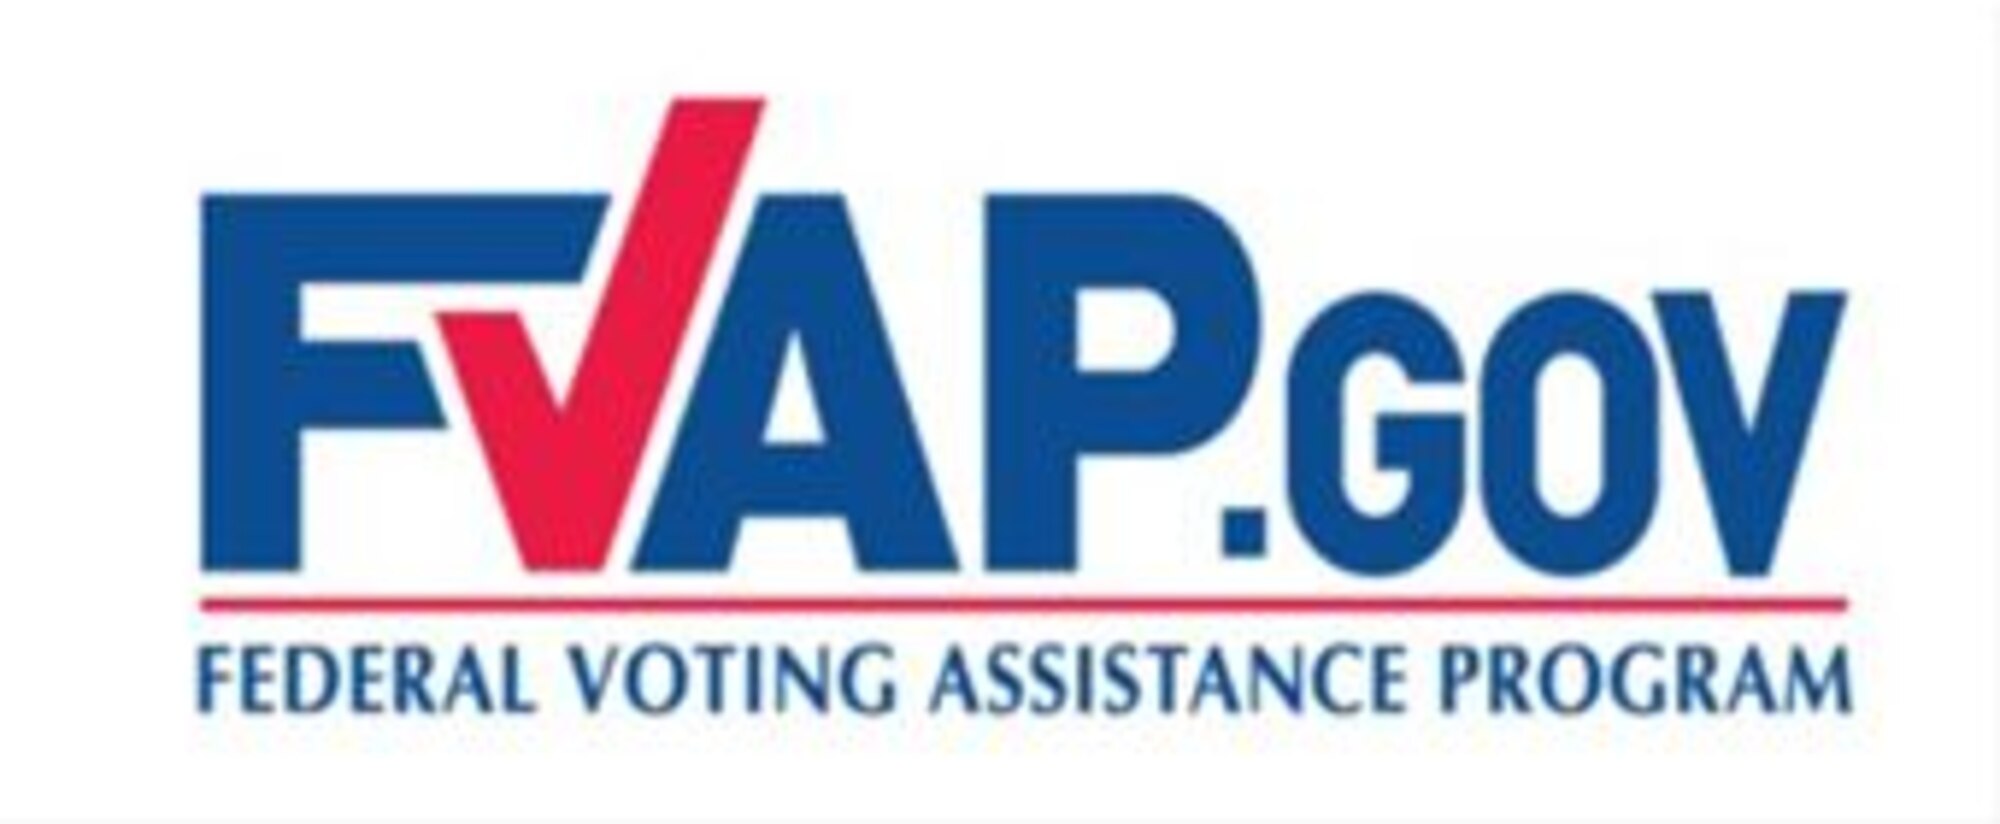 The November 4th general election is coming up. For those military members who vote by absentee ballot, they must act NOW to make sure that they have an opportunity to have their vote counted. If you have already registered but have not received a State ballot for the November 4th General Election, go to www.FVAP.gov  and follow the step-by-step instructions. (Courtesy Graphic)
